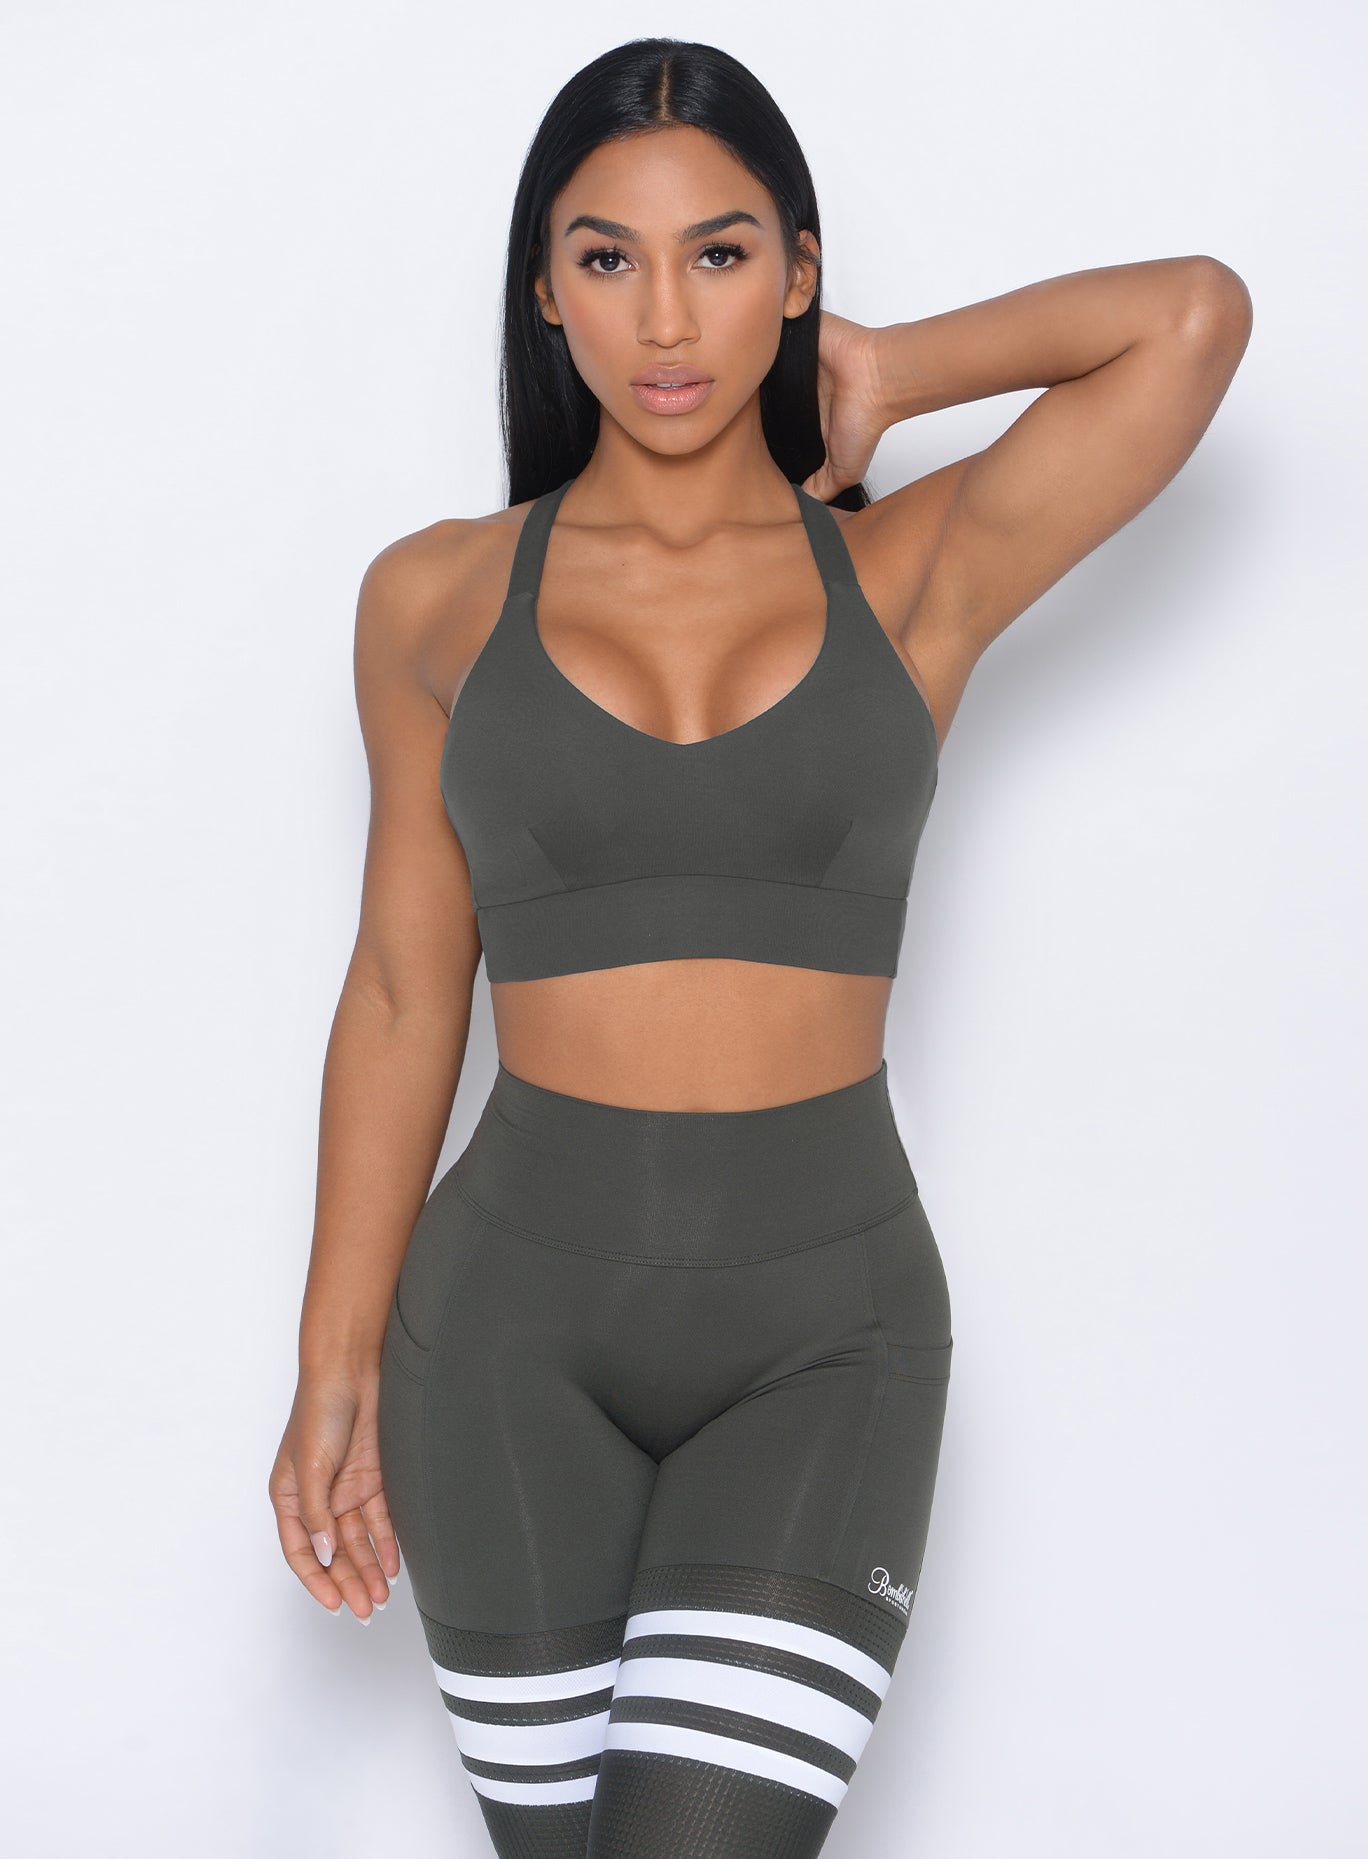 Model facing forward wearing our synergy sports bra in hunter green color and a matching leggings